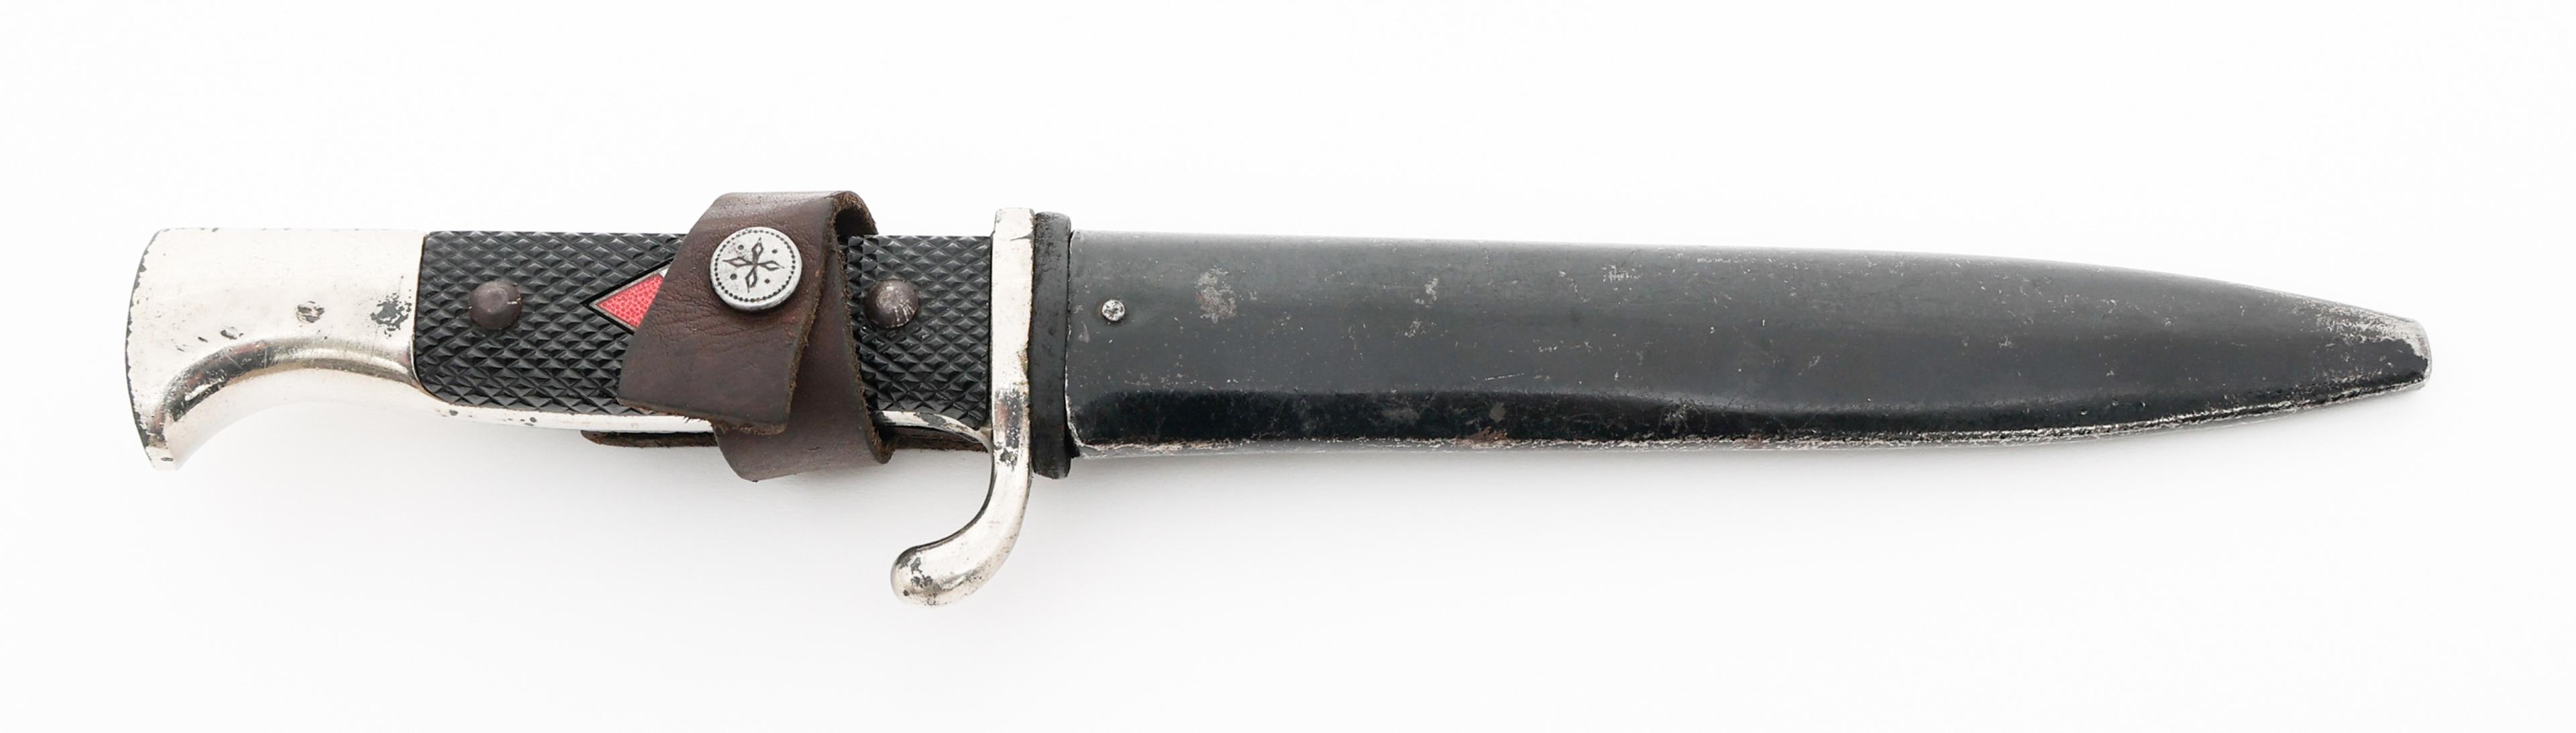 WWII GERMAN HITLER YOUTH KNIFE WITH MODIFIED BLADE